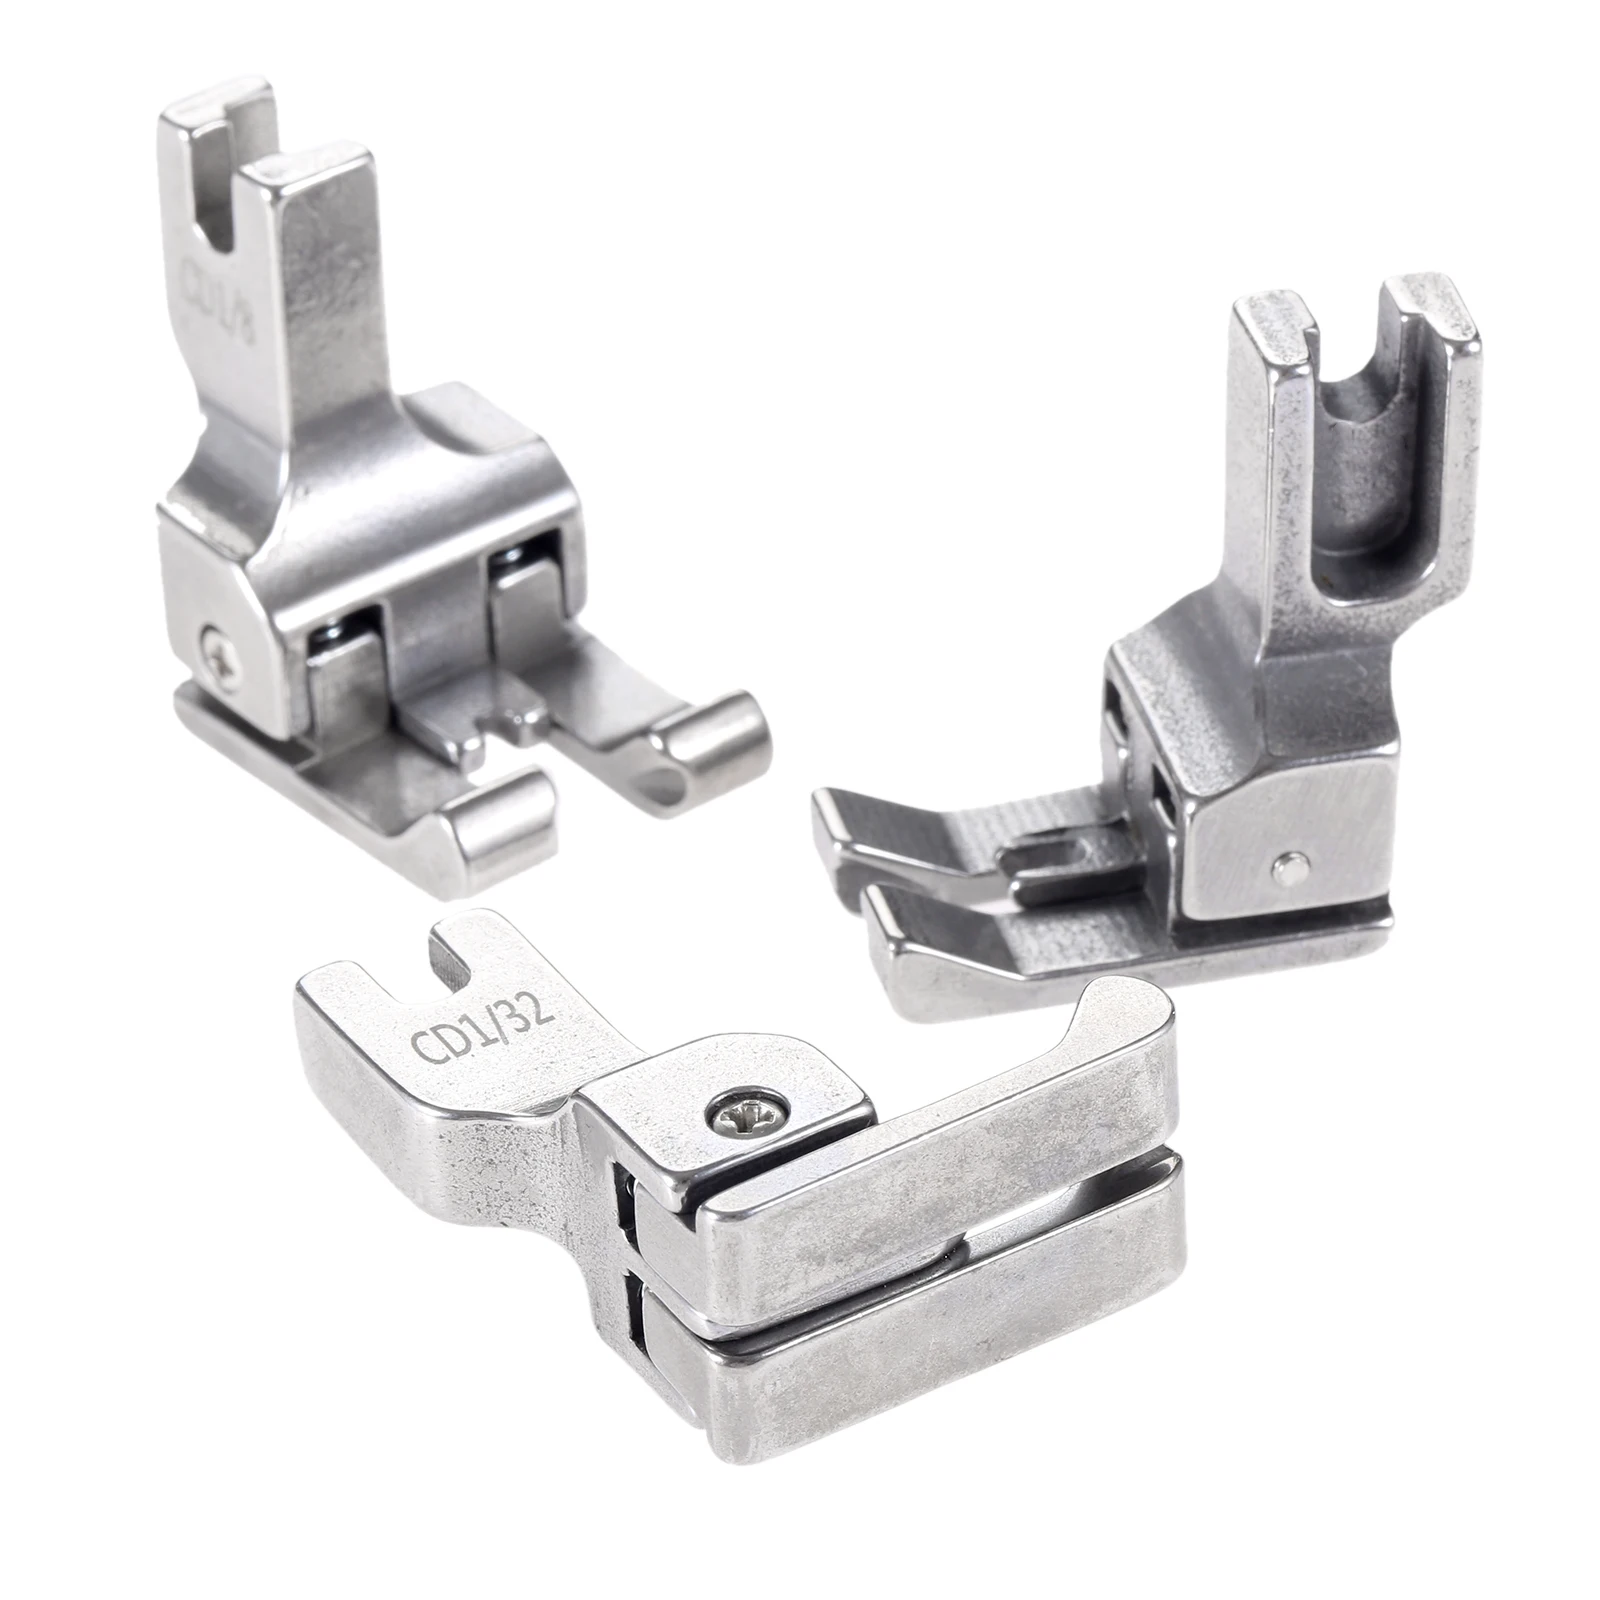 1pc Double Compensating Presser Foot Industrial Sewing Machine Steel Right&Left top stitching CD1/32 CD1/16 CD1/8 CD3/16 feet images - 6